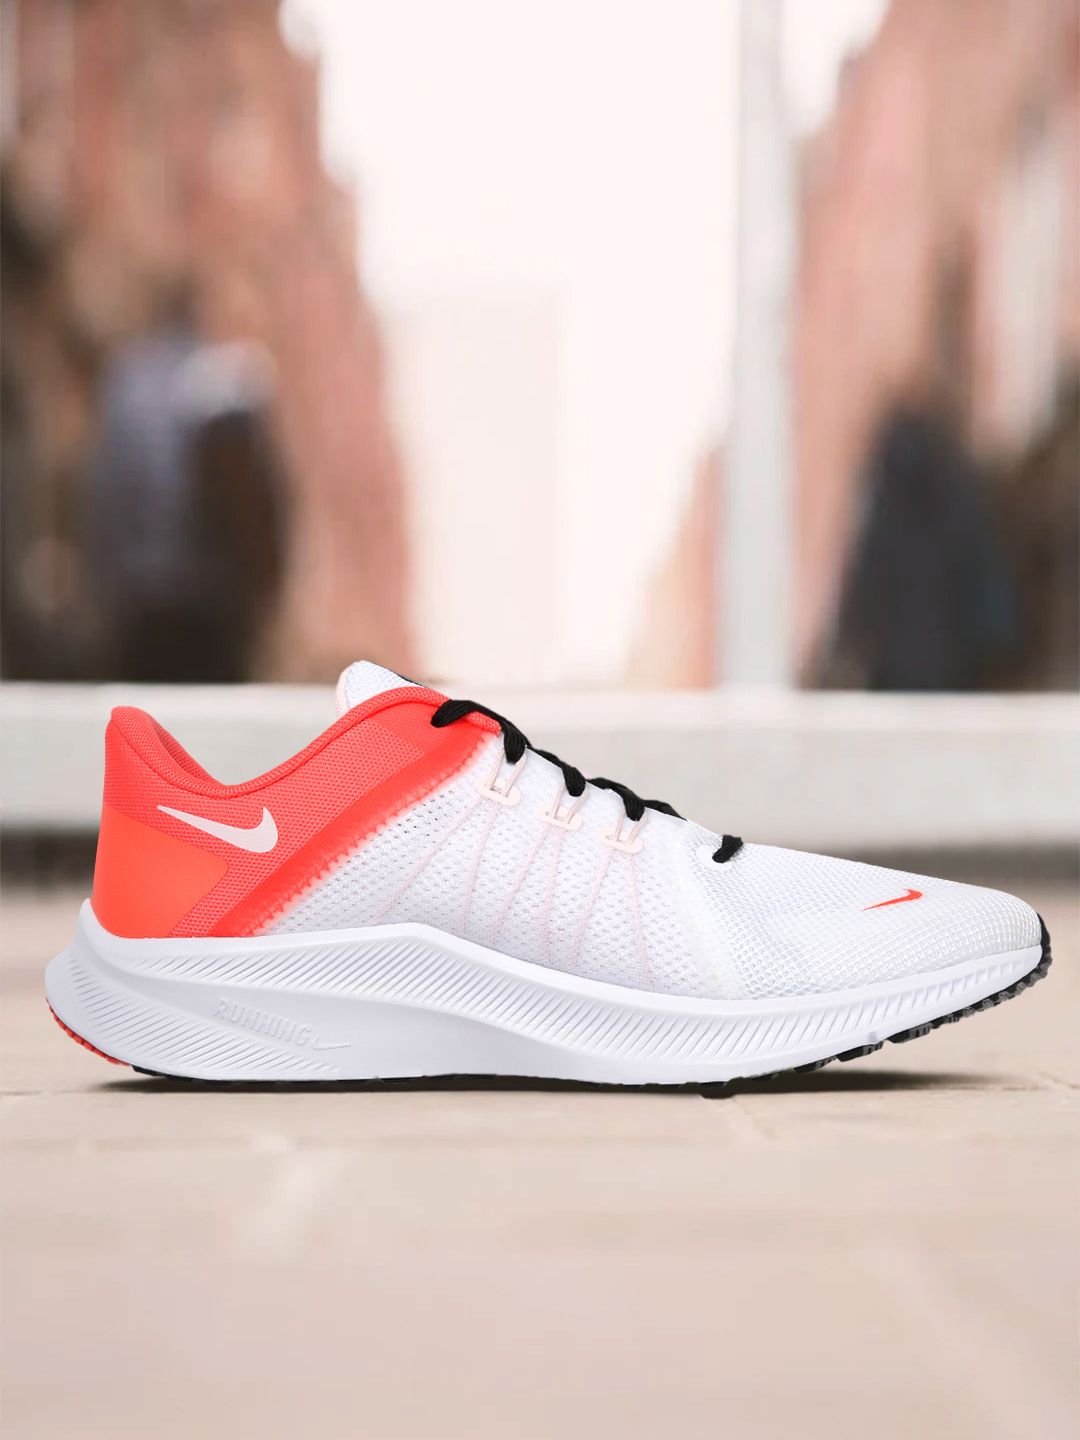 Nike Women Off-White & Pink QUEST 4 Running Shoes Price in India